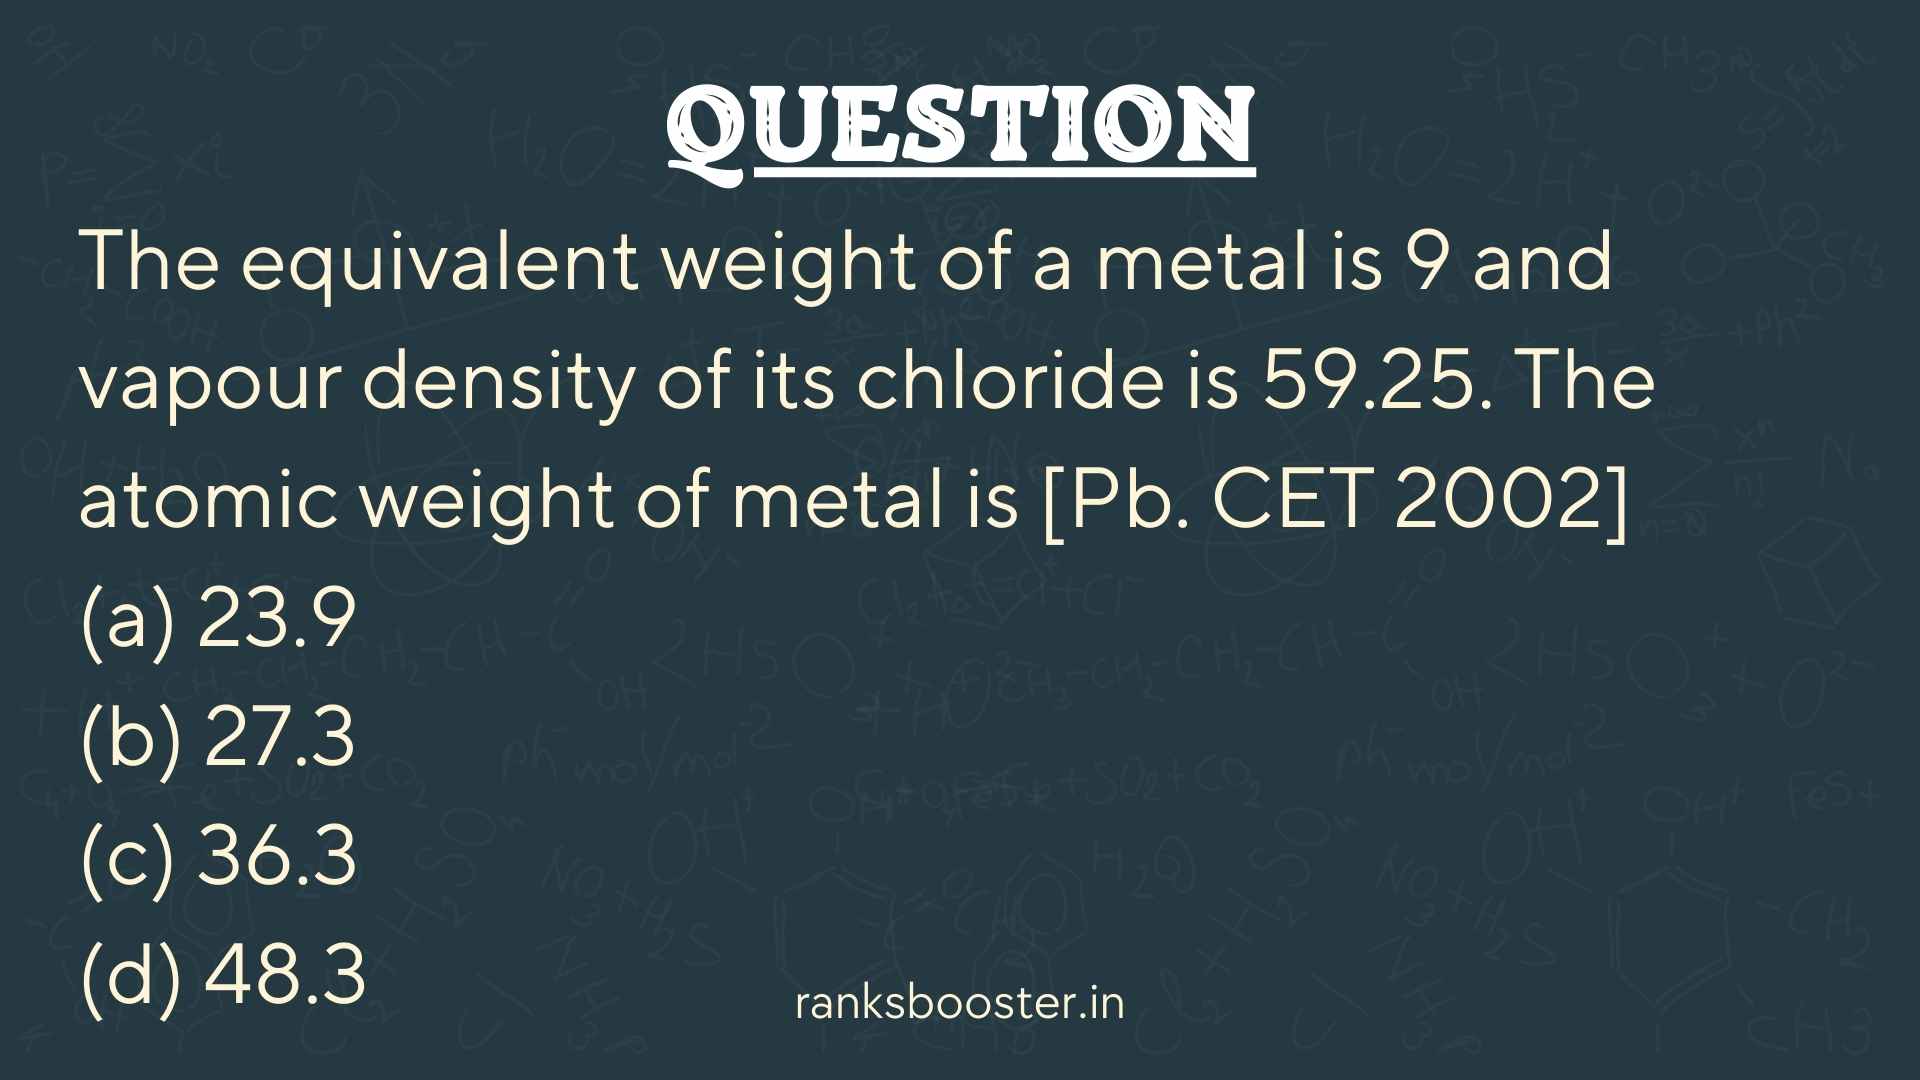 The equivalent weight of a metal is 9 and vapour density of its chloride is 59.25. The atomic weight of metal is [Pb. CET 2002] (a) 23.9 (b) 27.3 (c) 36.3 (d) 48.3